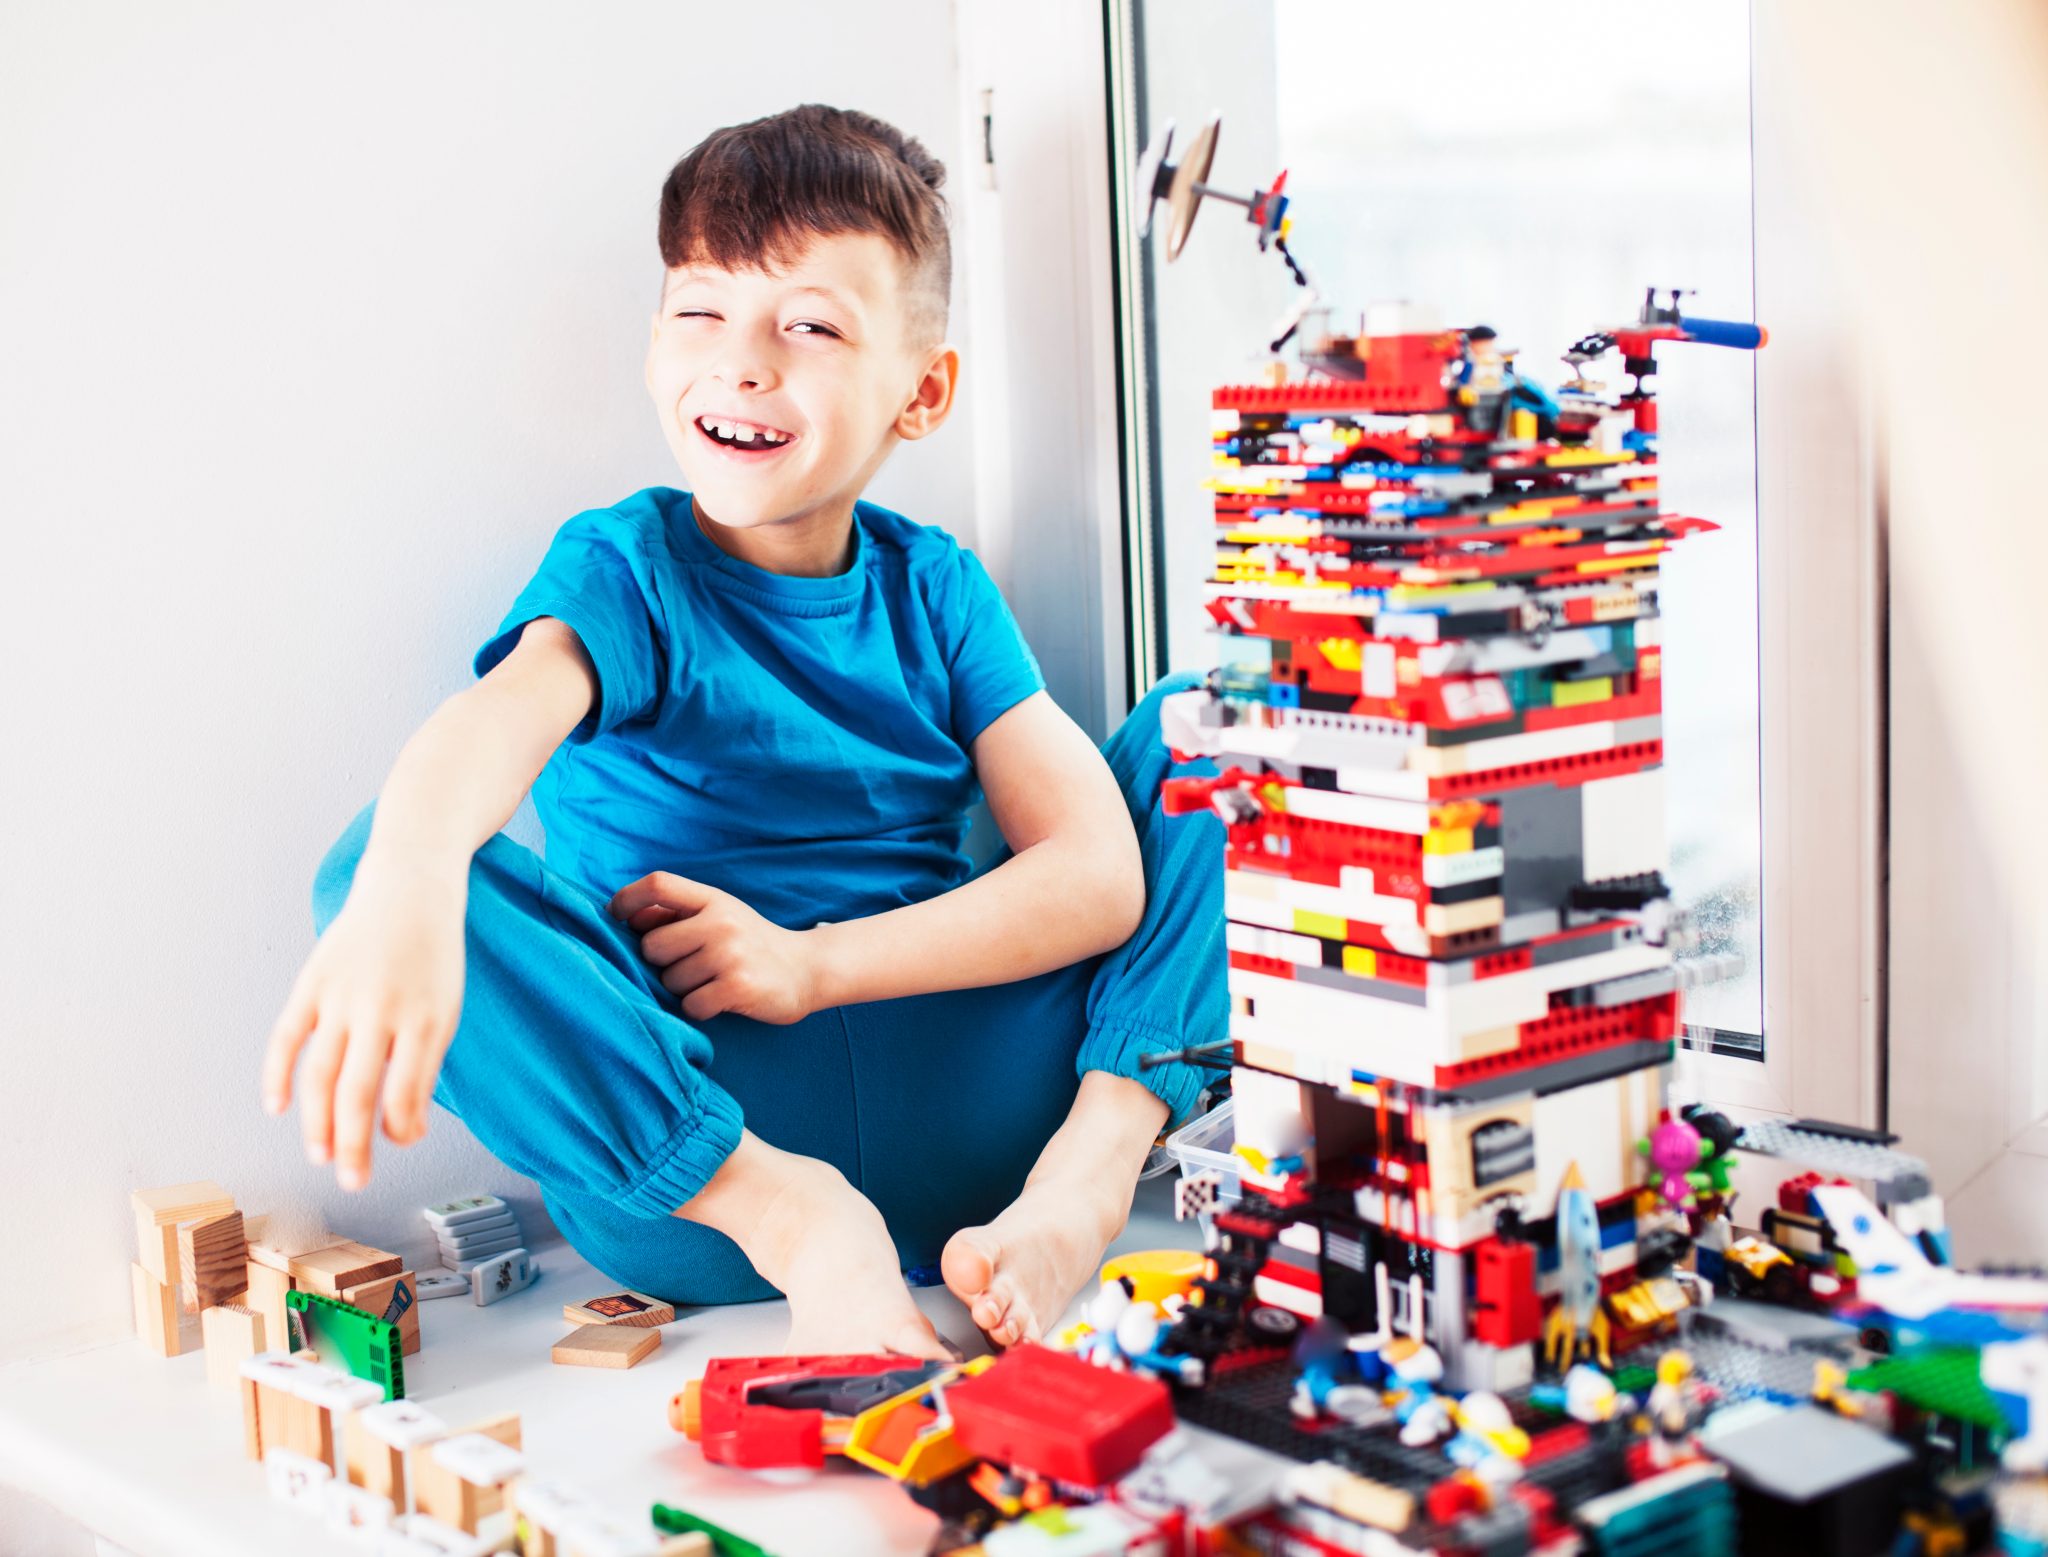 Get Your Kid Lego Tape and Watch Him Build a World on the Walls - Lego Tape  is the New Toy All The Kids are Going to Want